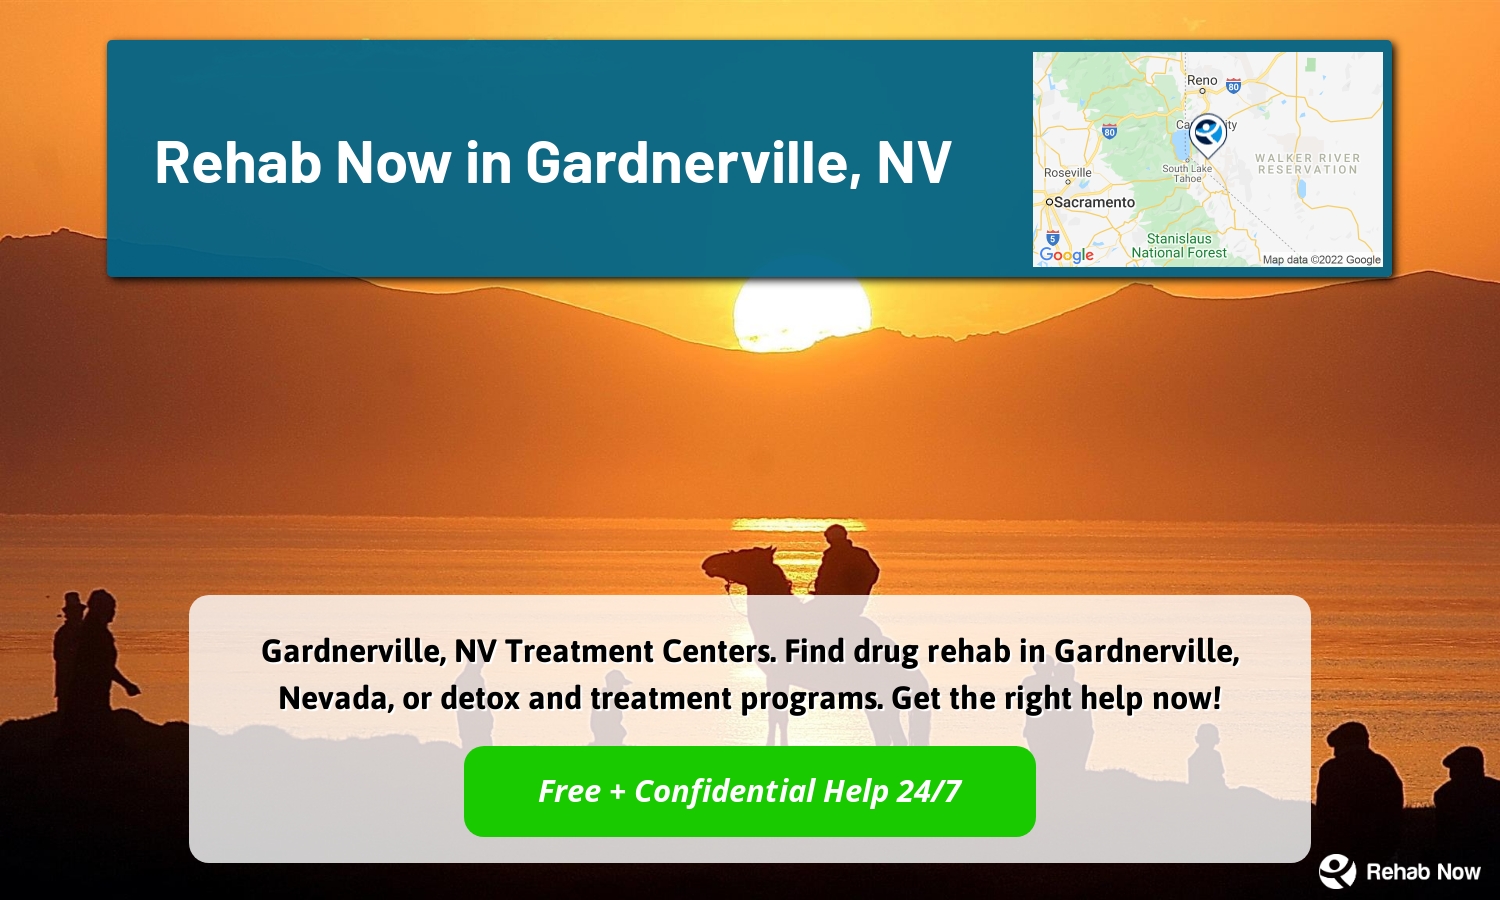 Gardnerville, NV Treatment Centers. Find drug rehab in Gardnerville, Nevada, or detox and treatment programs. Get the right help now!